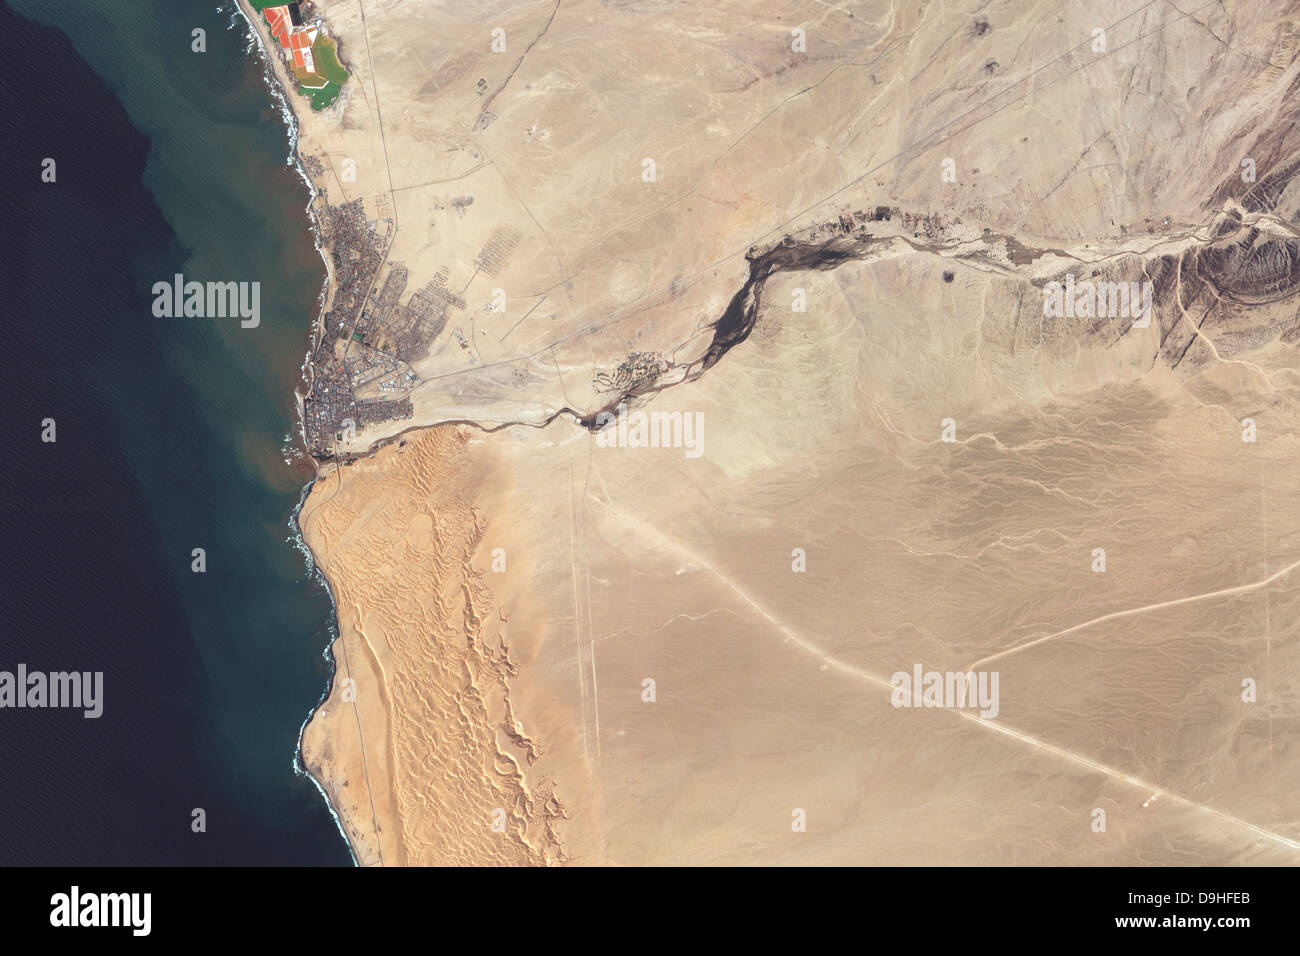 Satellite image of the Swakop River in the western part of Namibia. Stock Photo